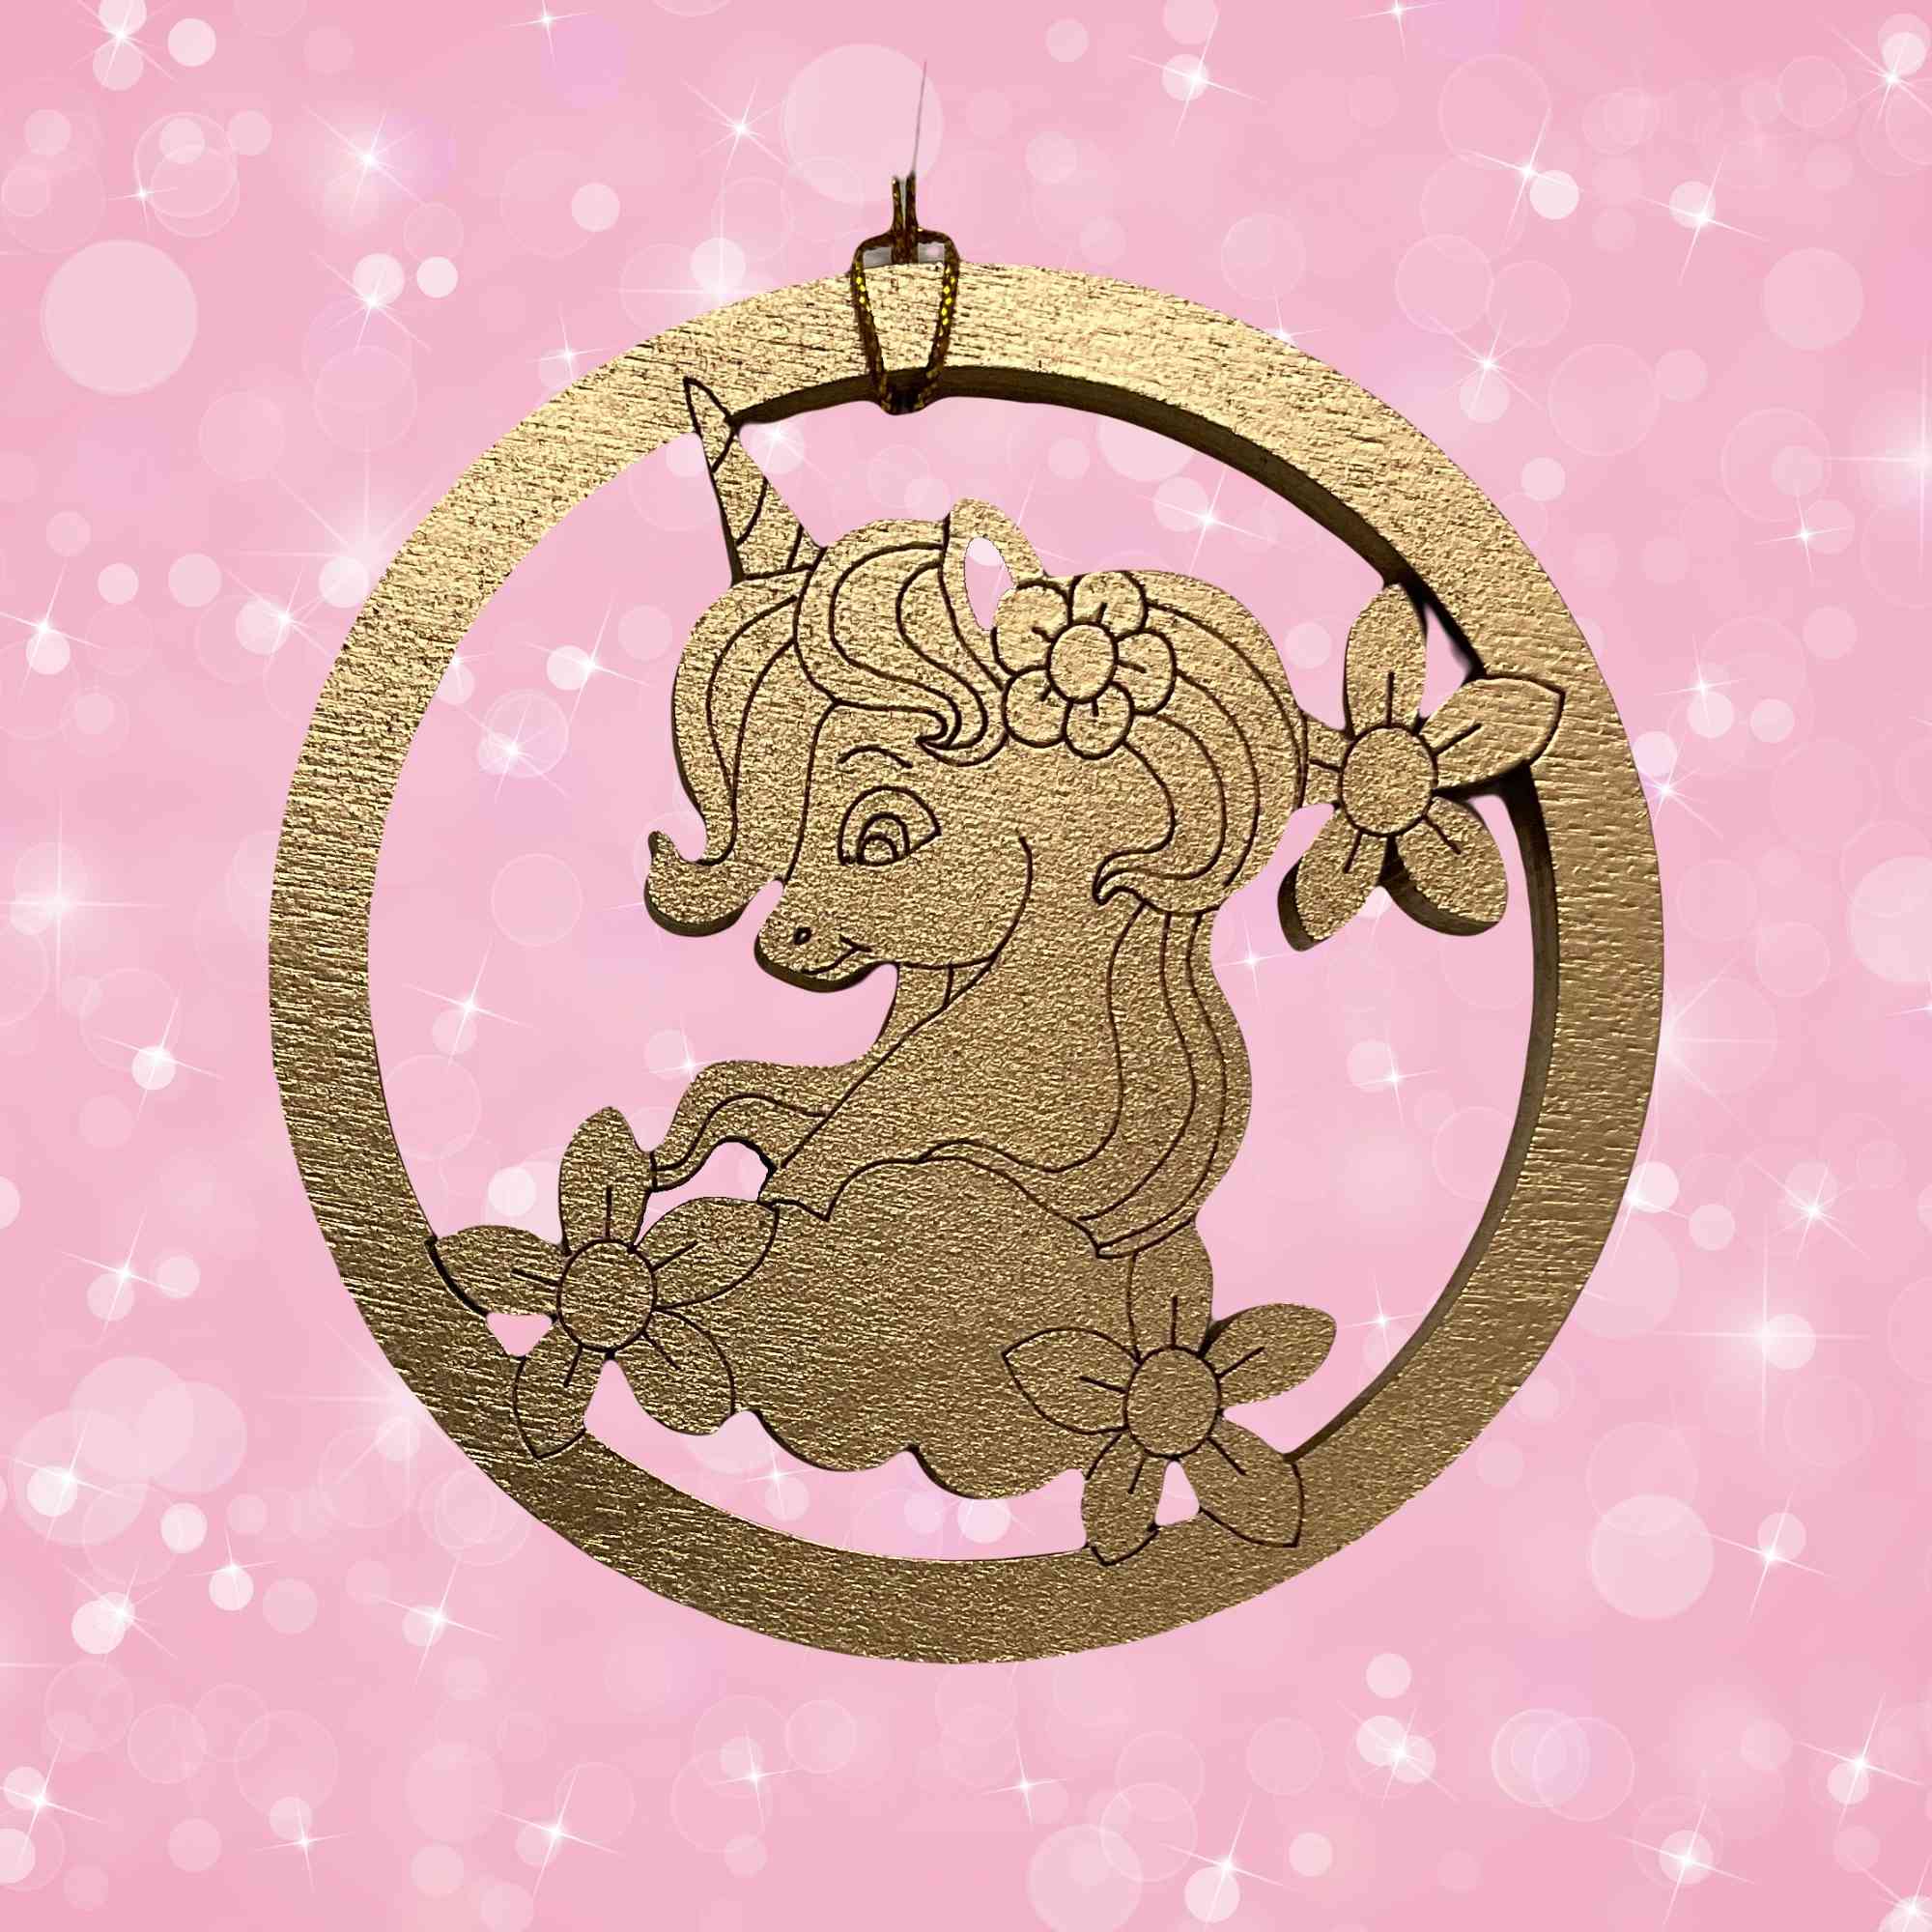 Unicorn Ornament or Wine Bottle Gift Tag